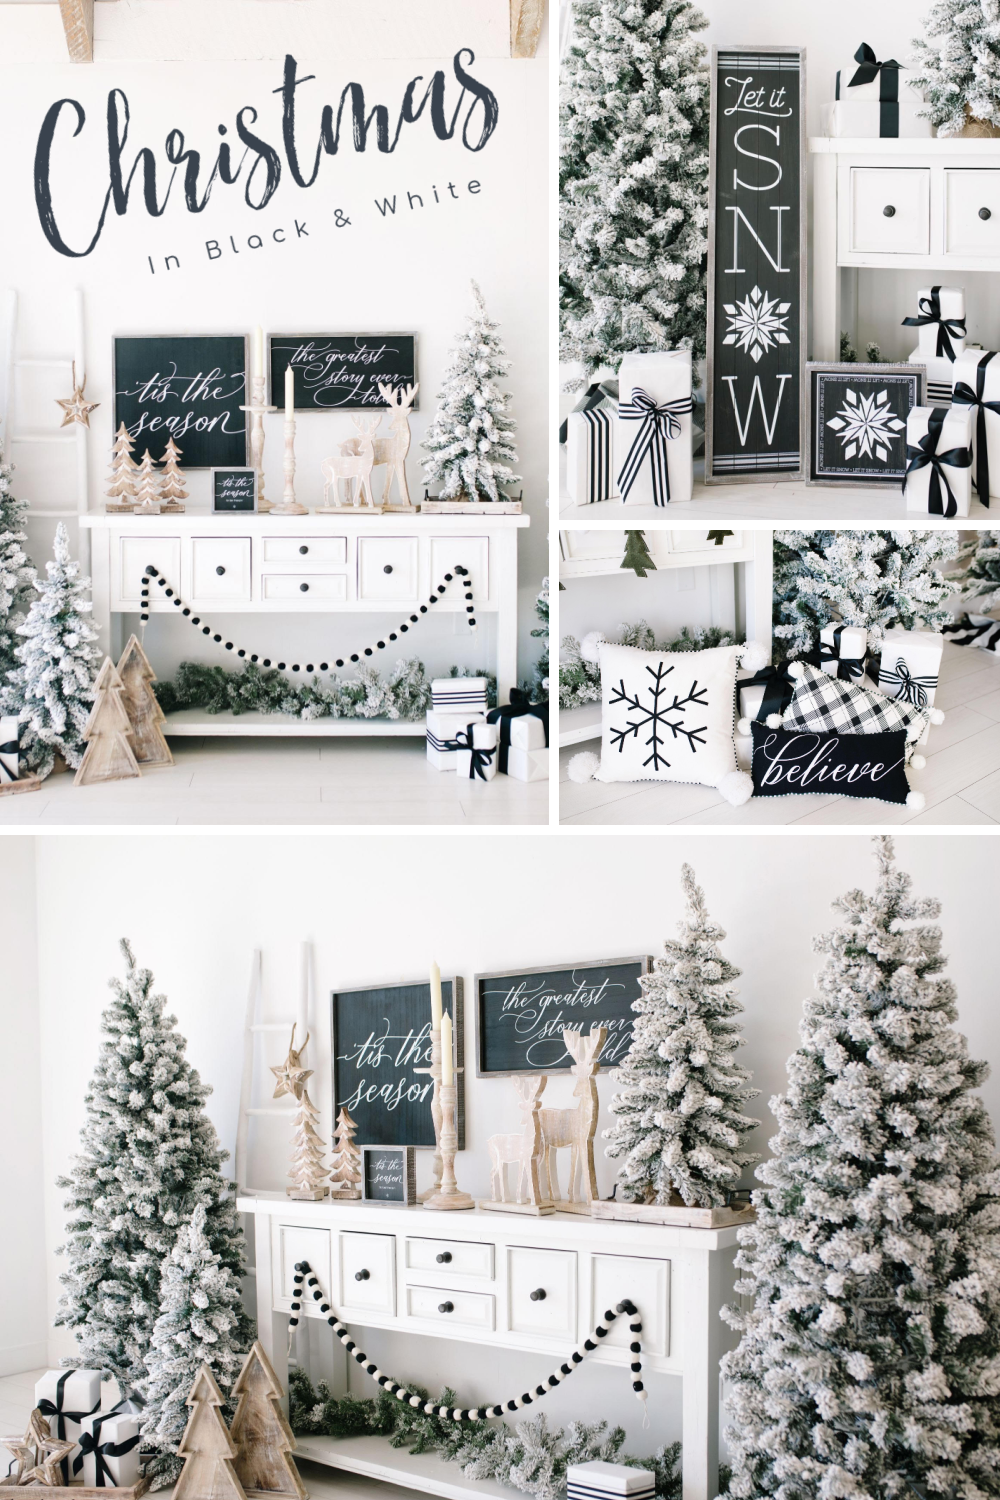 Transitional Black & White Home Decor For Christmas and Winter -   14 diy christmas decorations for home ideas